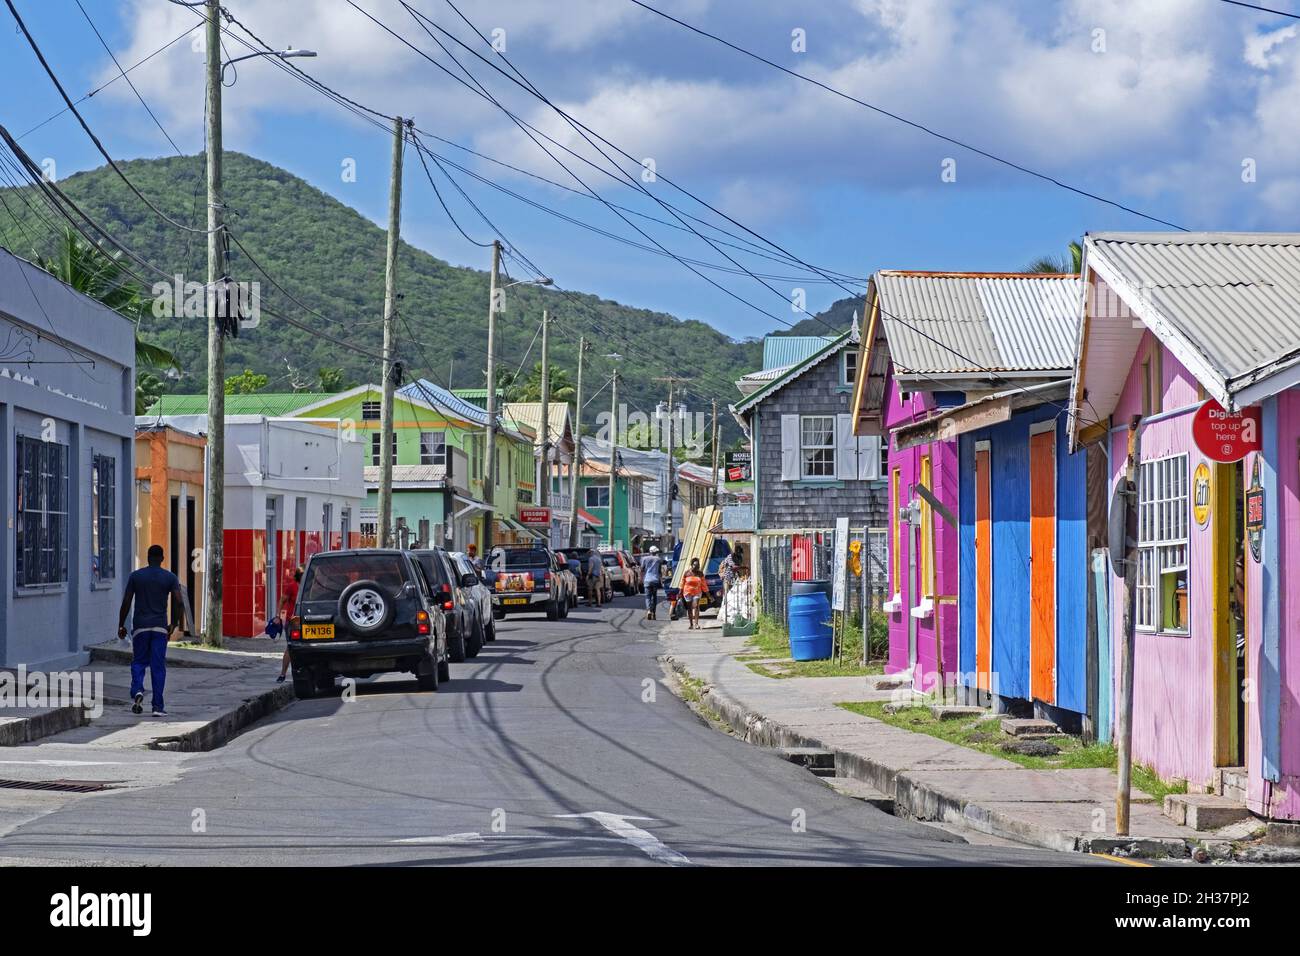 Colorful houses and shops in the main street of Hillsborough, capital city of Carriacou, island of the Grenadine Islands, Grenada in the Caribbean Sea Stock Photo